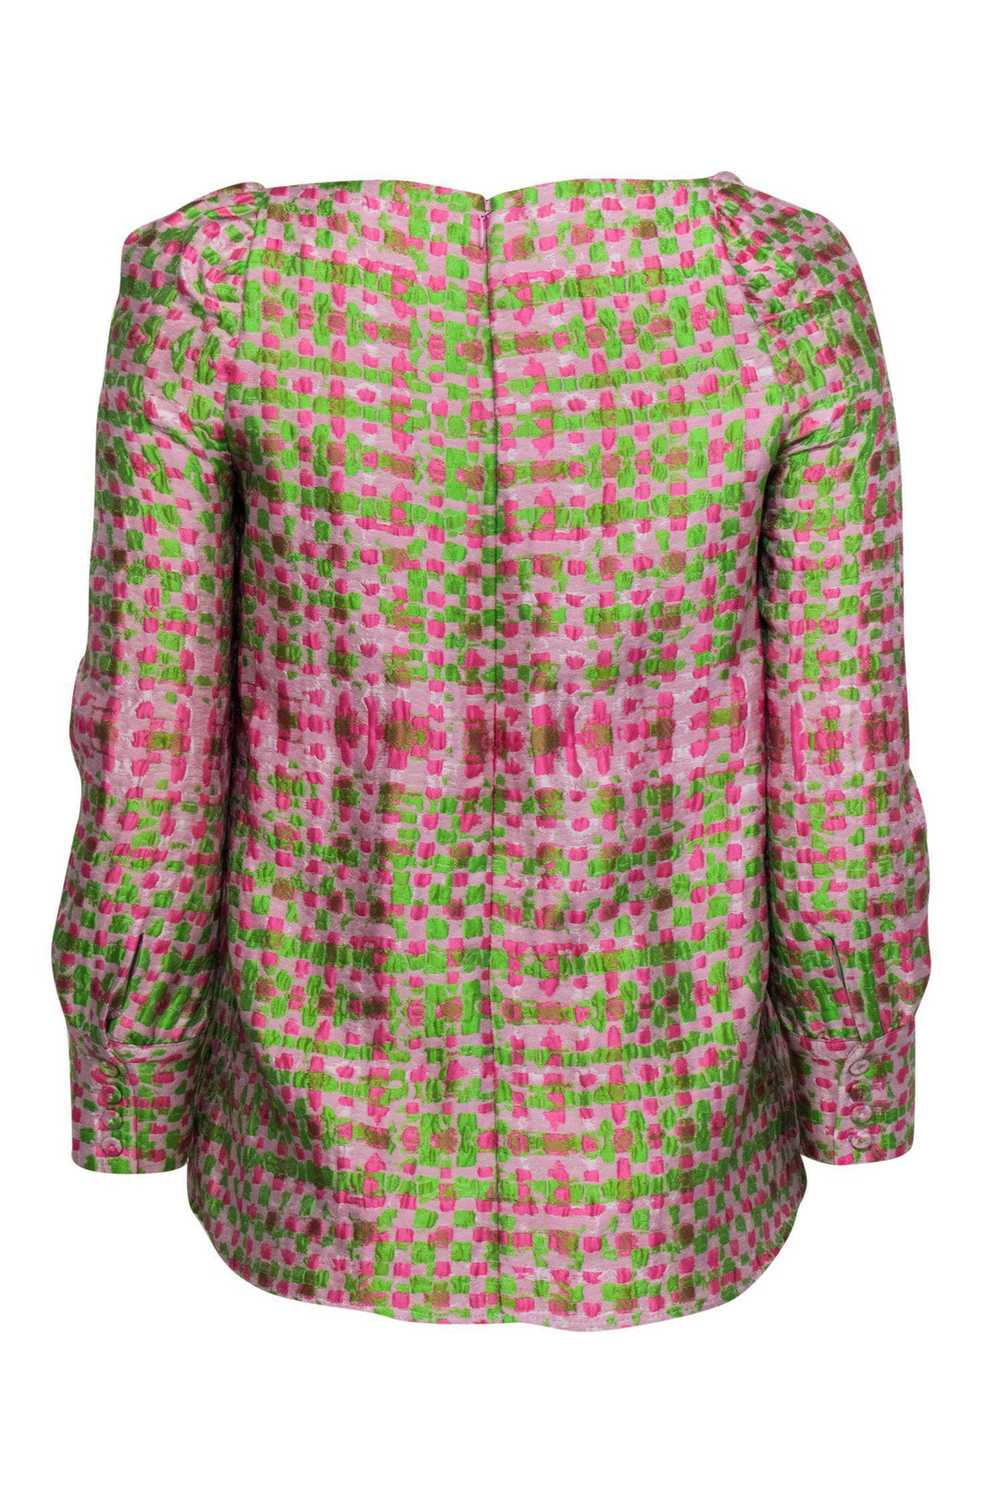 Tuckernuck - Pink & Green Square Neck Textured Bl… - image 3